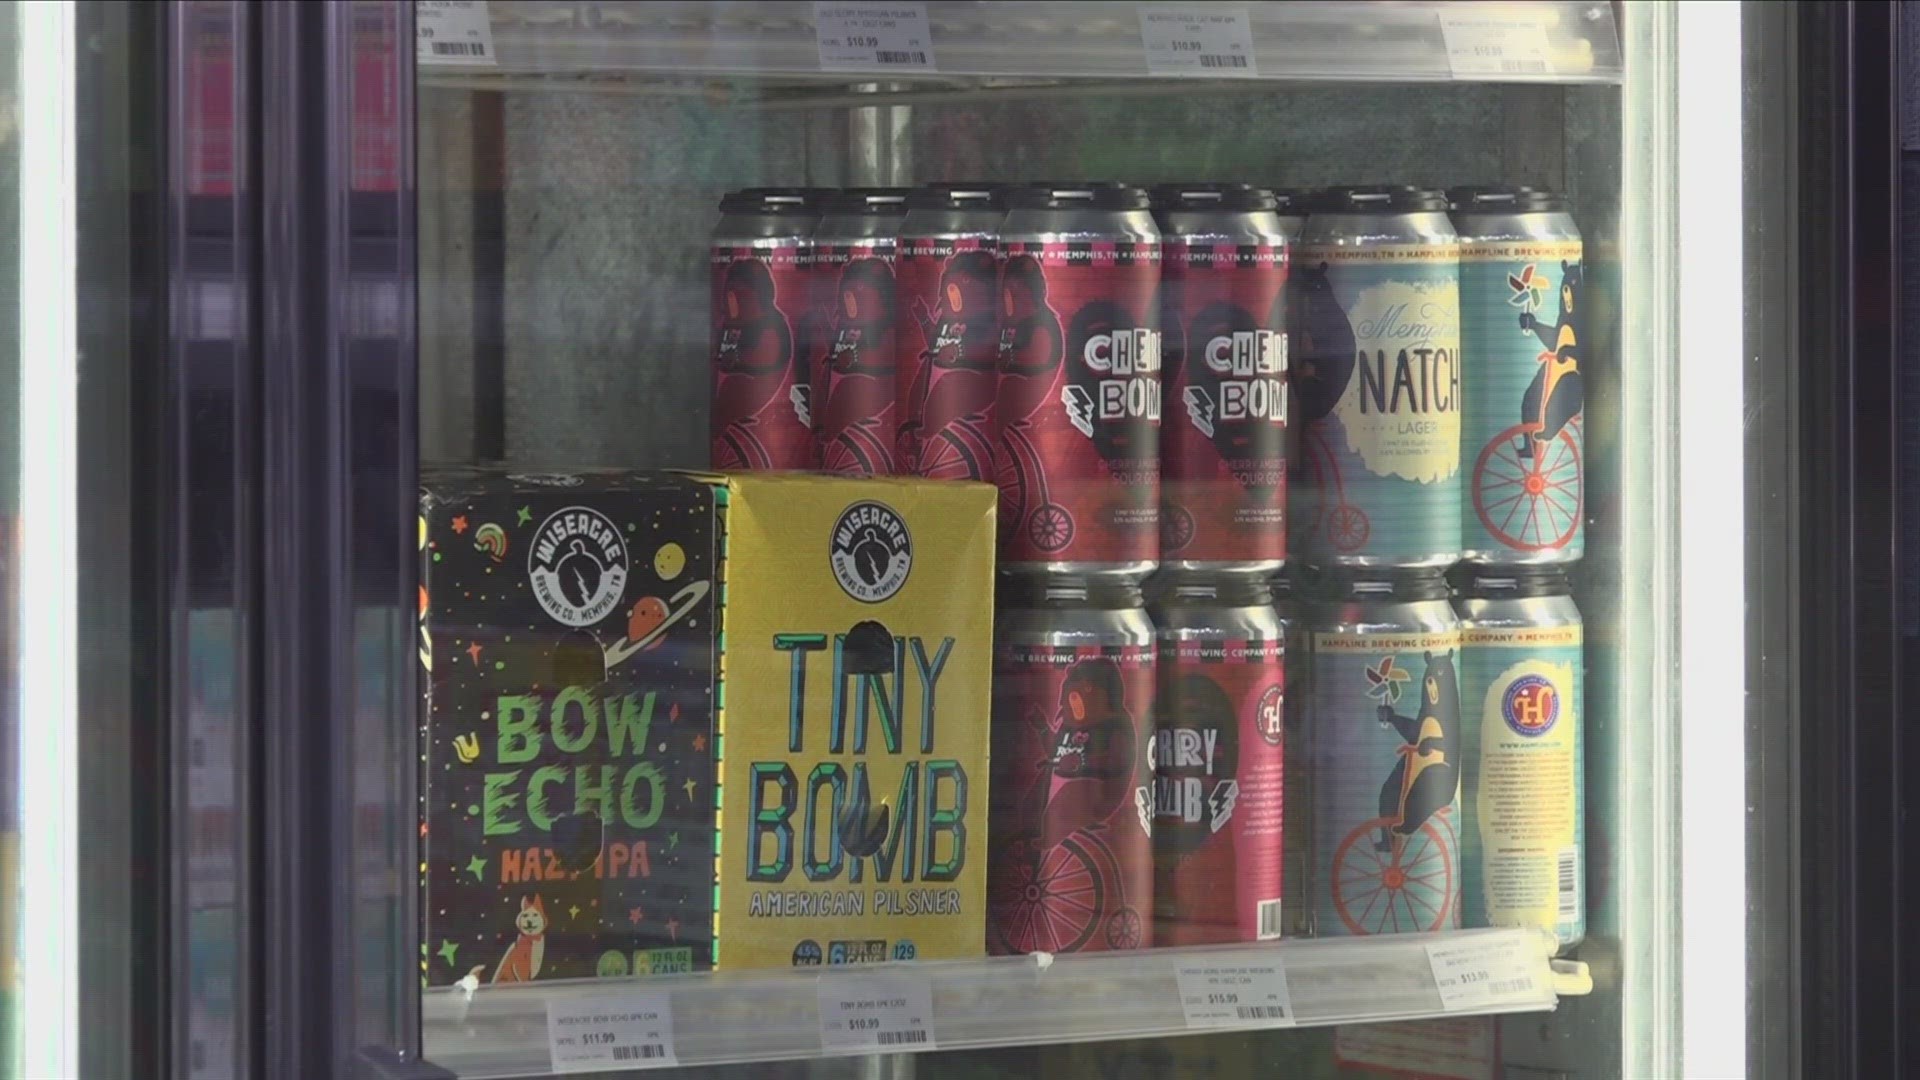 Controversy is brewing over a proposed bill that would put a deep freeze on selling cold beer in Tennessee, and Memphians in the industry are not happy.